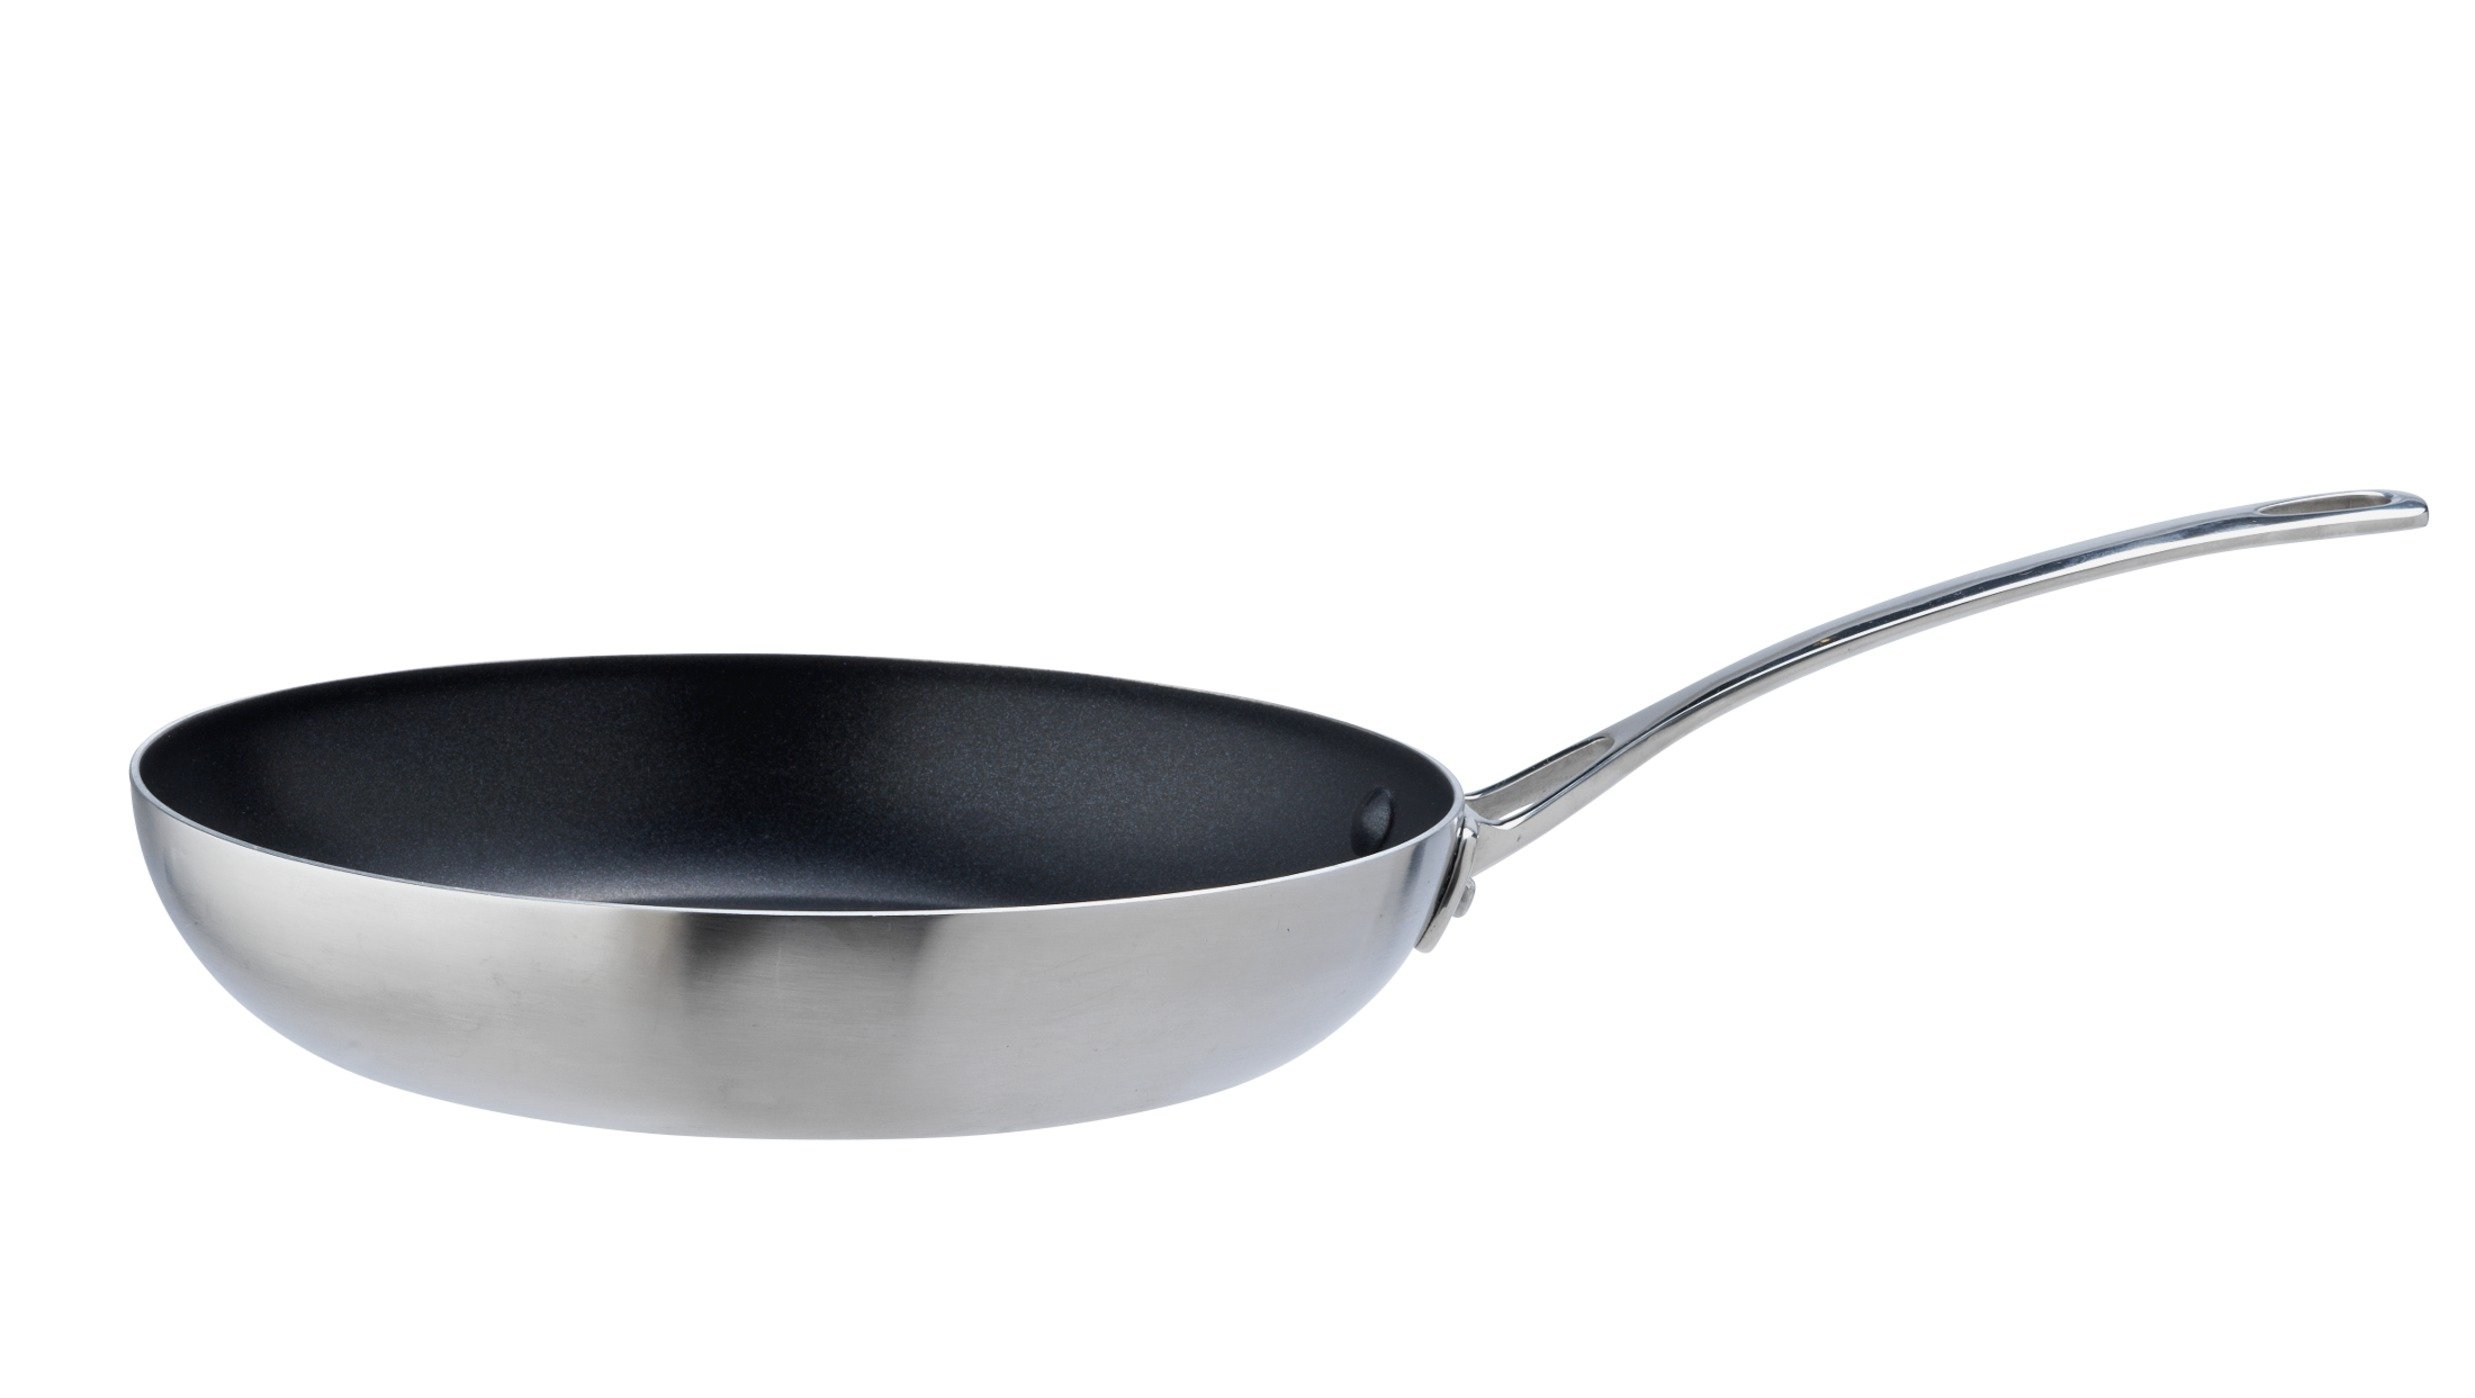 Sainsbury's Home Cooks Collection 24cm Triply Frying Pan review